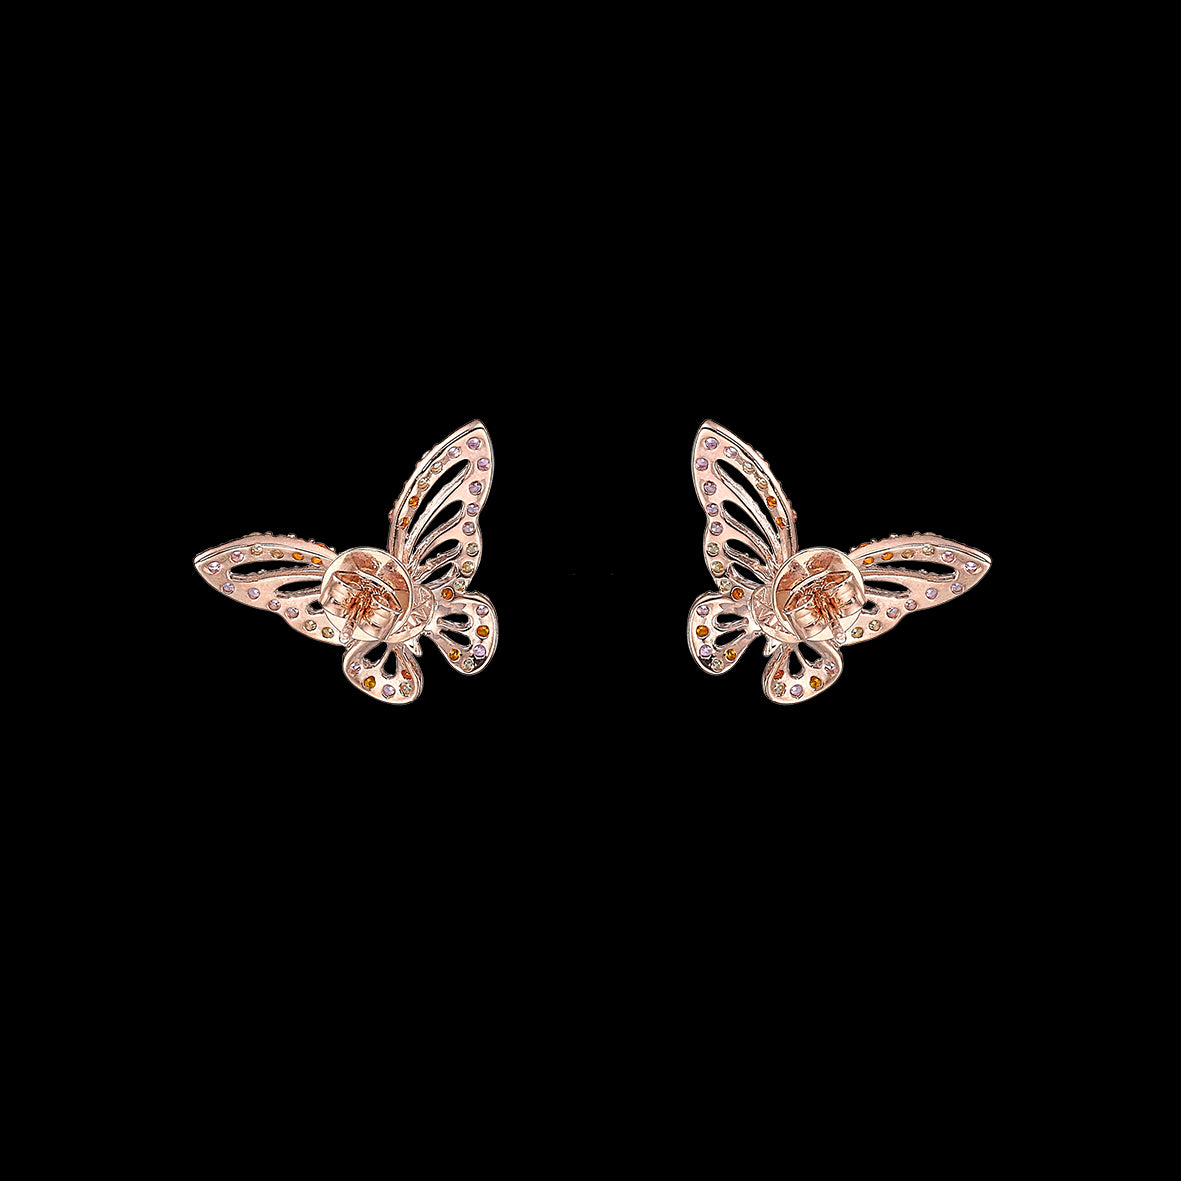 Rose Butterfly Studs, Earrings, Anabela Chan Joaillerie - Fine jewelry with laboratory grown and created gemstones hand-crafted in the United Kingdom. Anabela Chan Joaillerie is the first fine jewellery brand in the world to champion laboratory-grown and created gemstones with high jewellery design, artisanal craftsmanship and a focus on ethical and sustainable innovations.